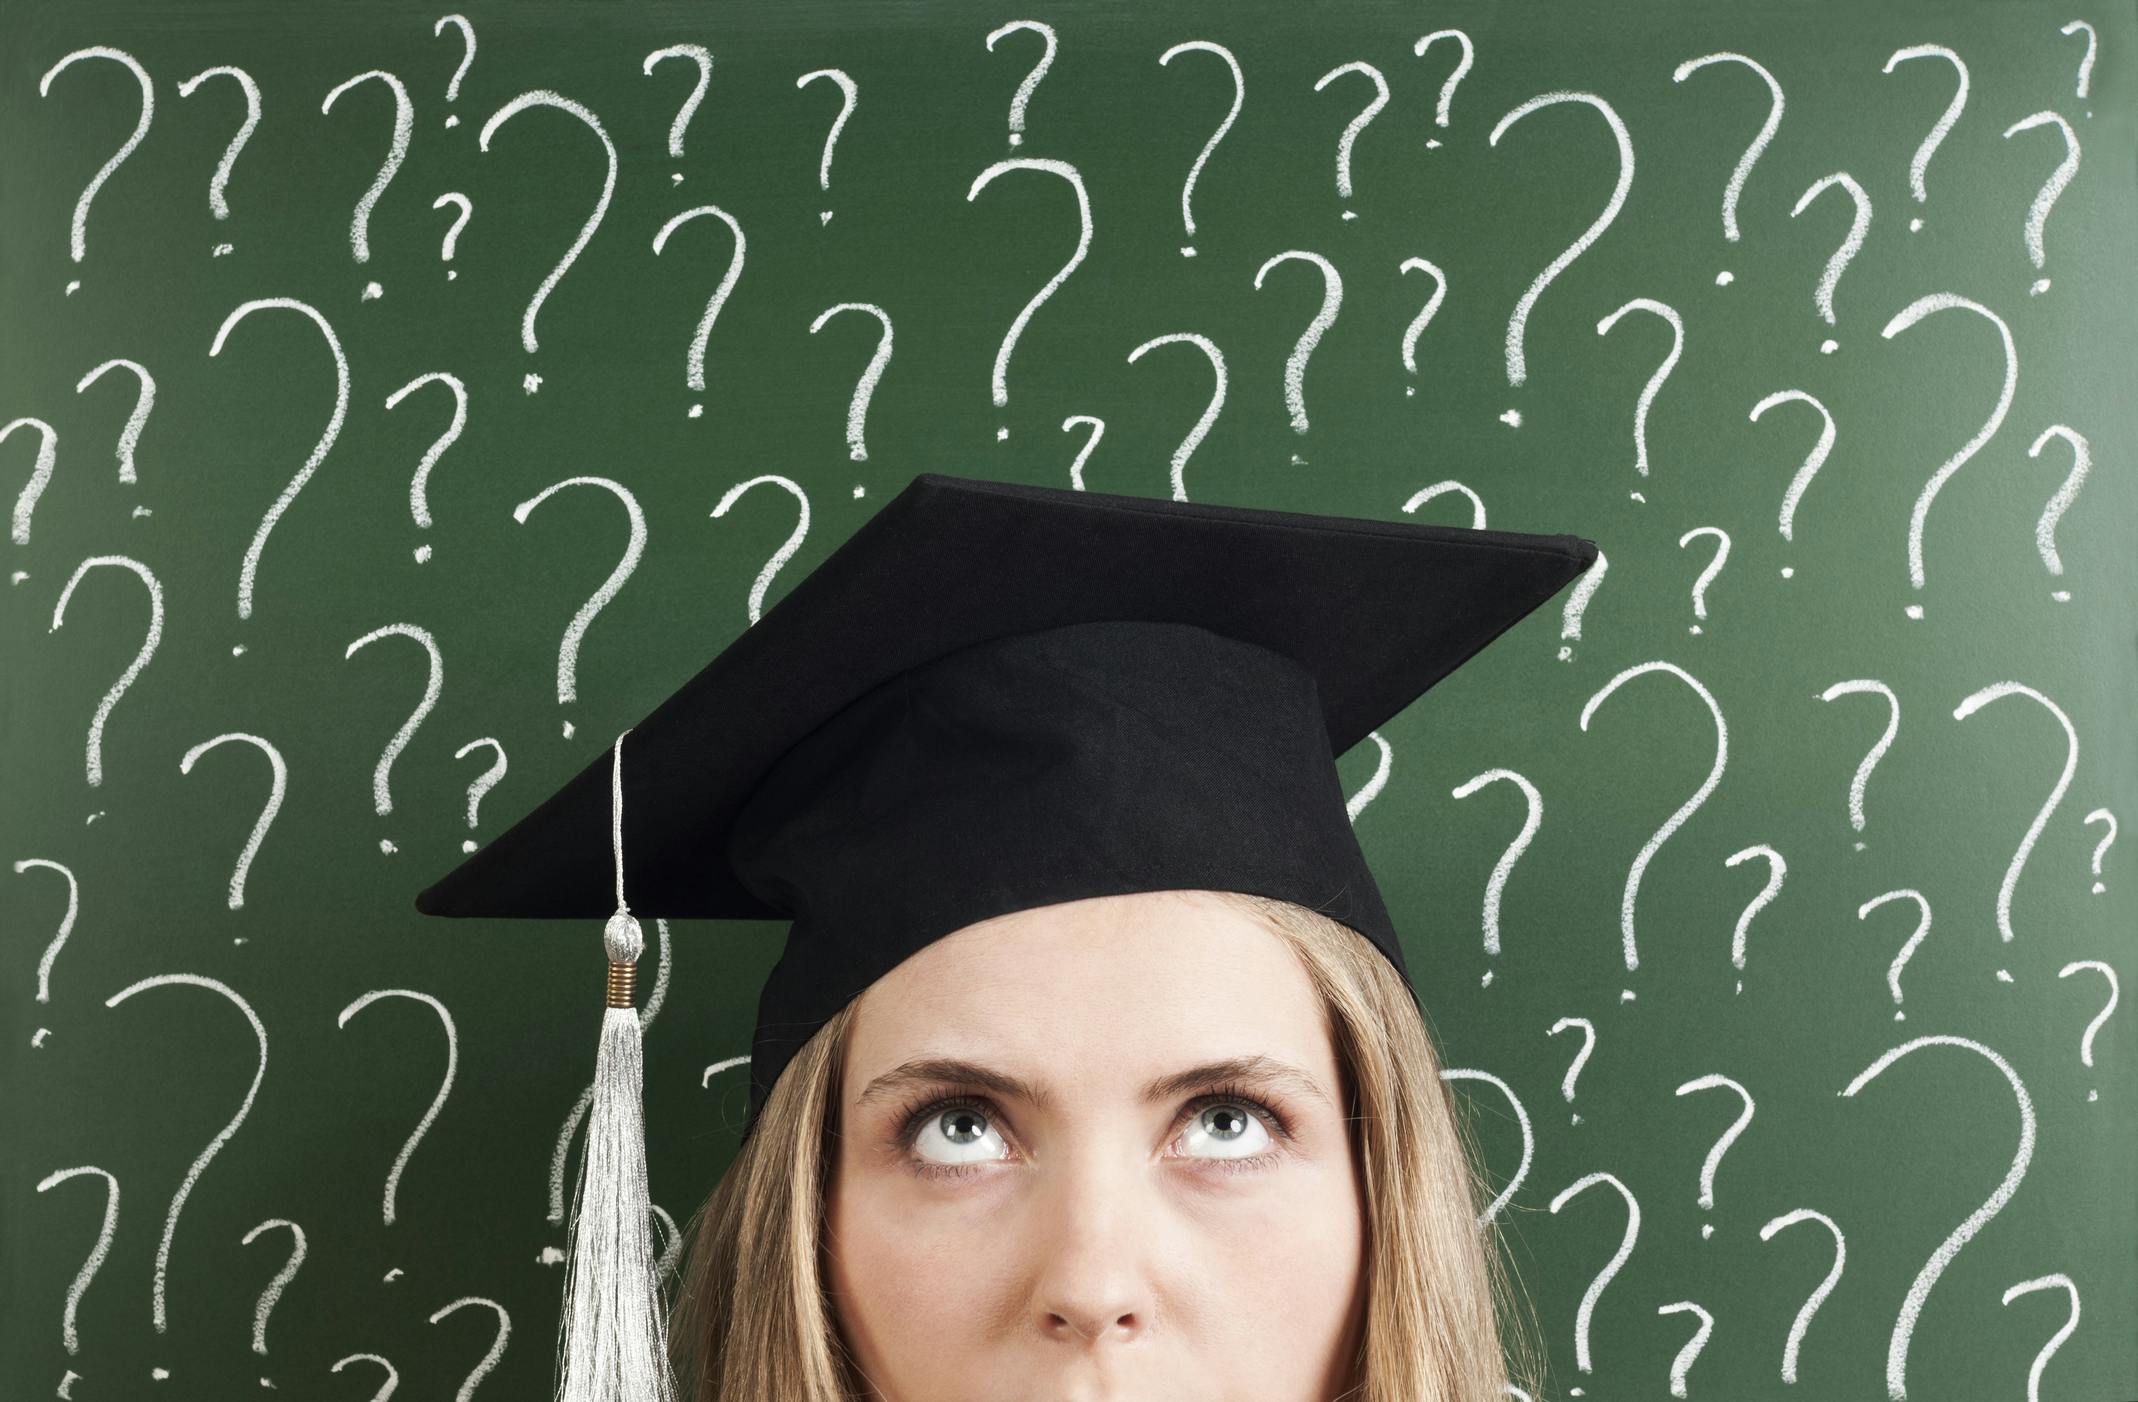 Peering Into the Future of Higher Education: What Will Students Want?